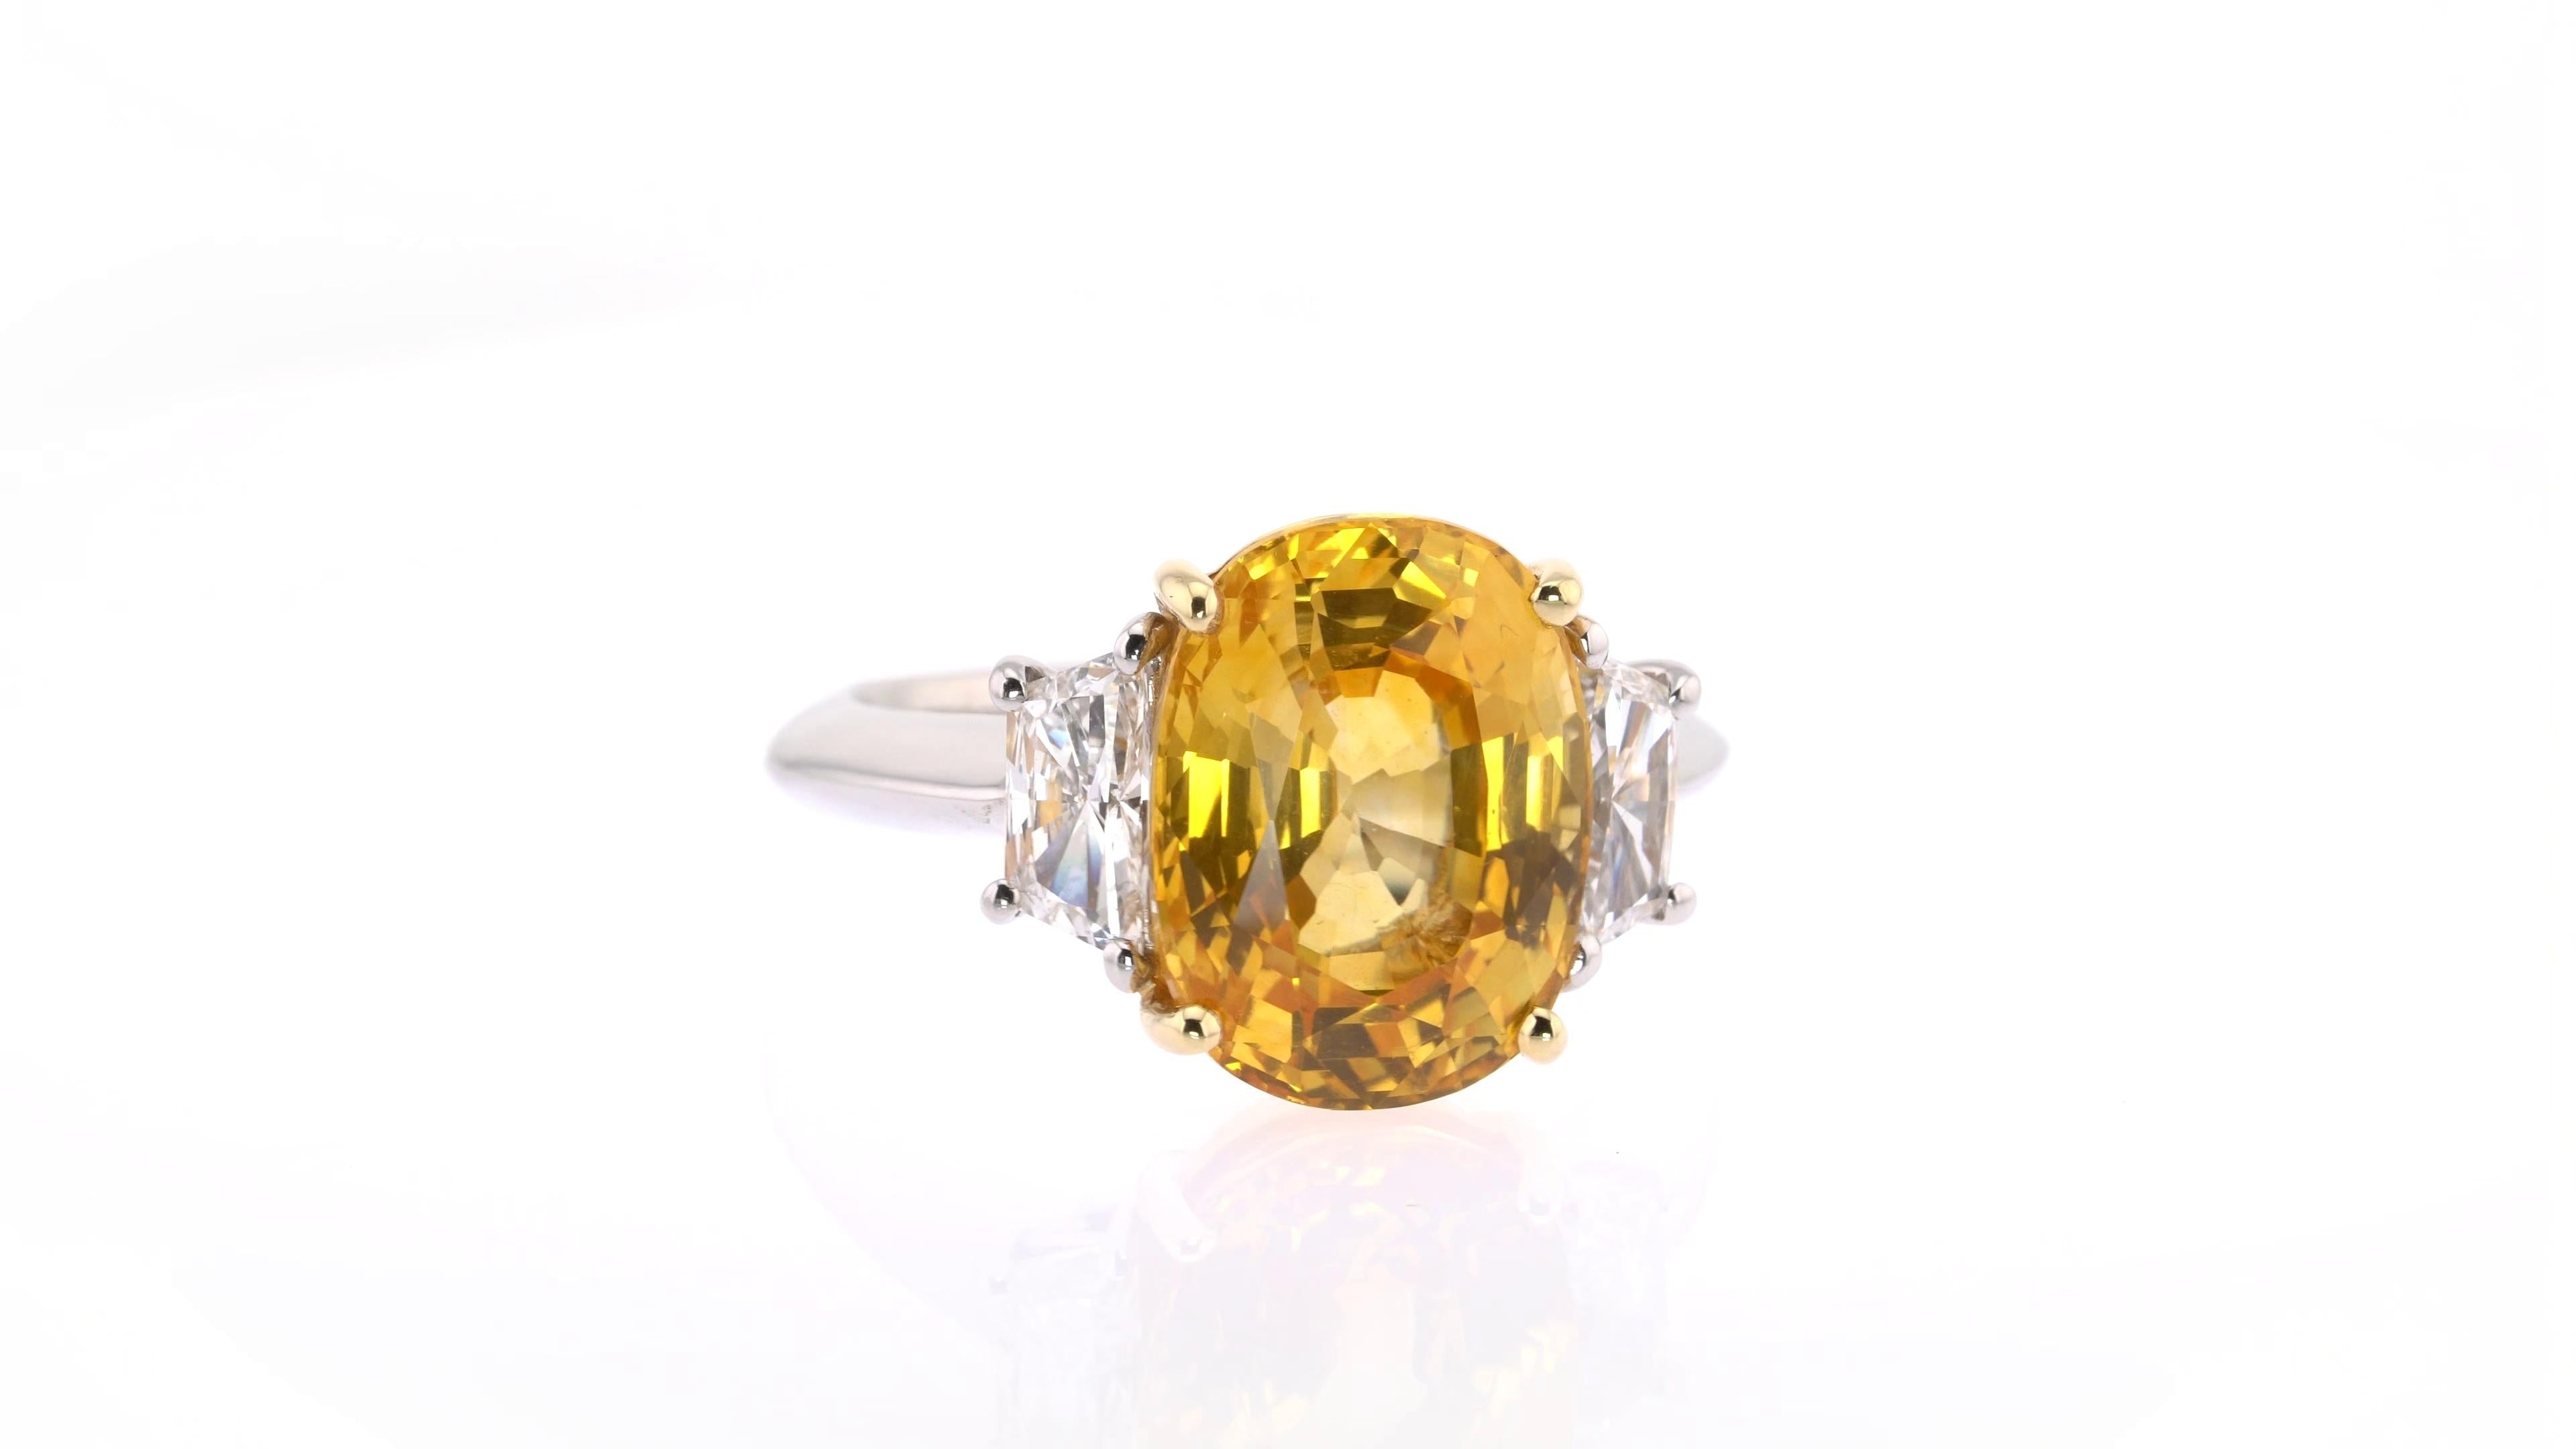 This astonishing yellow sapphire at the centre of this three-stone ring was hand-picked from the Tiffany vault and is truly one of a kind. Weighing more than eight carats and featured in a bold oval shape, it is shouldered by two trapezium white